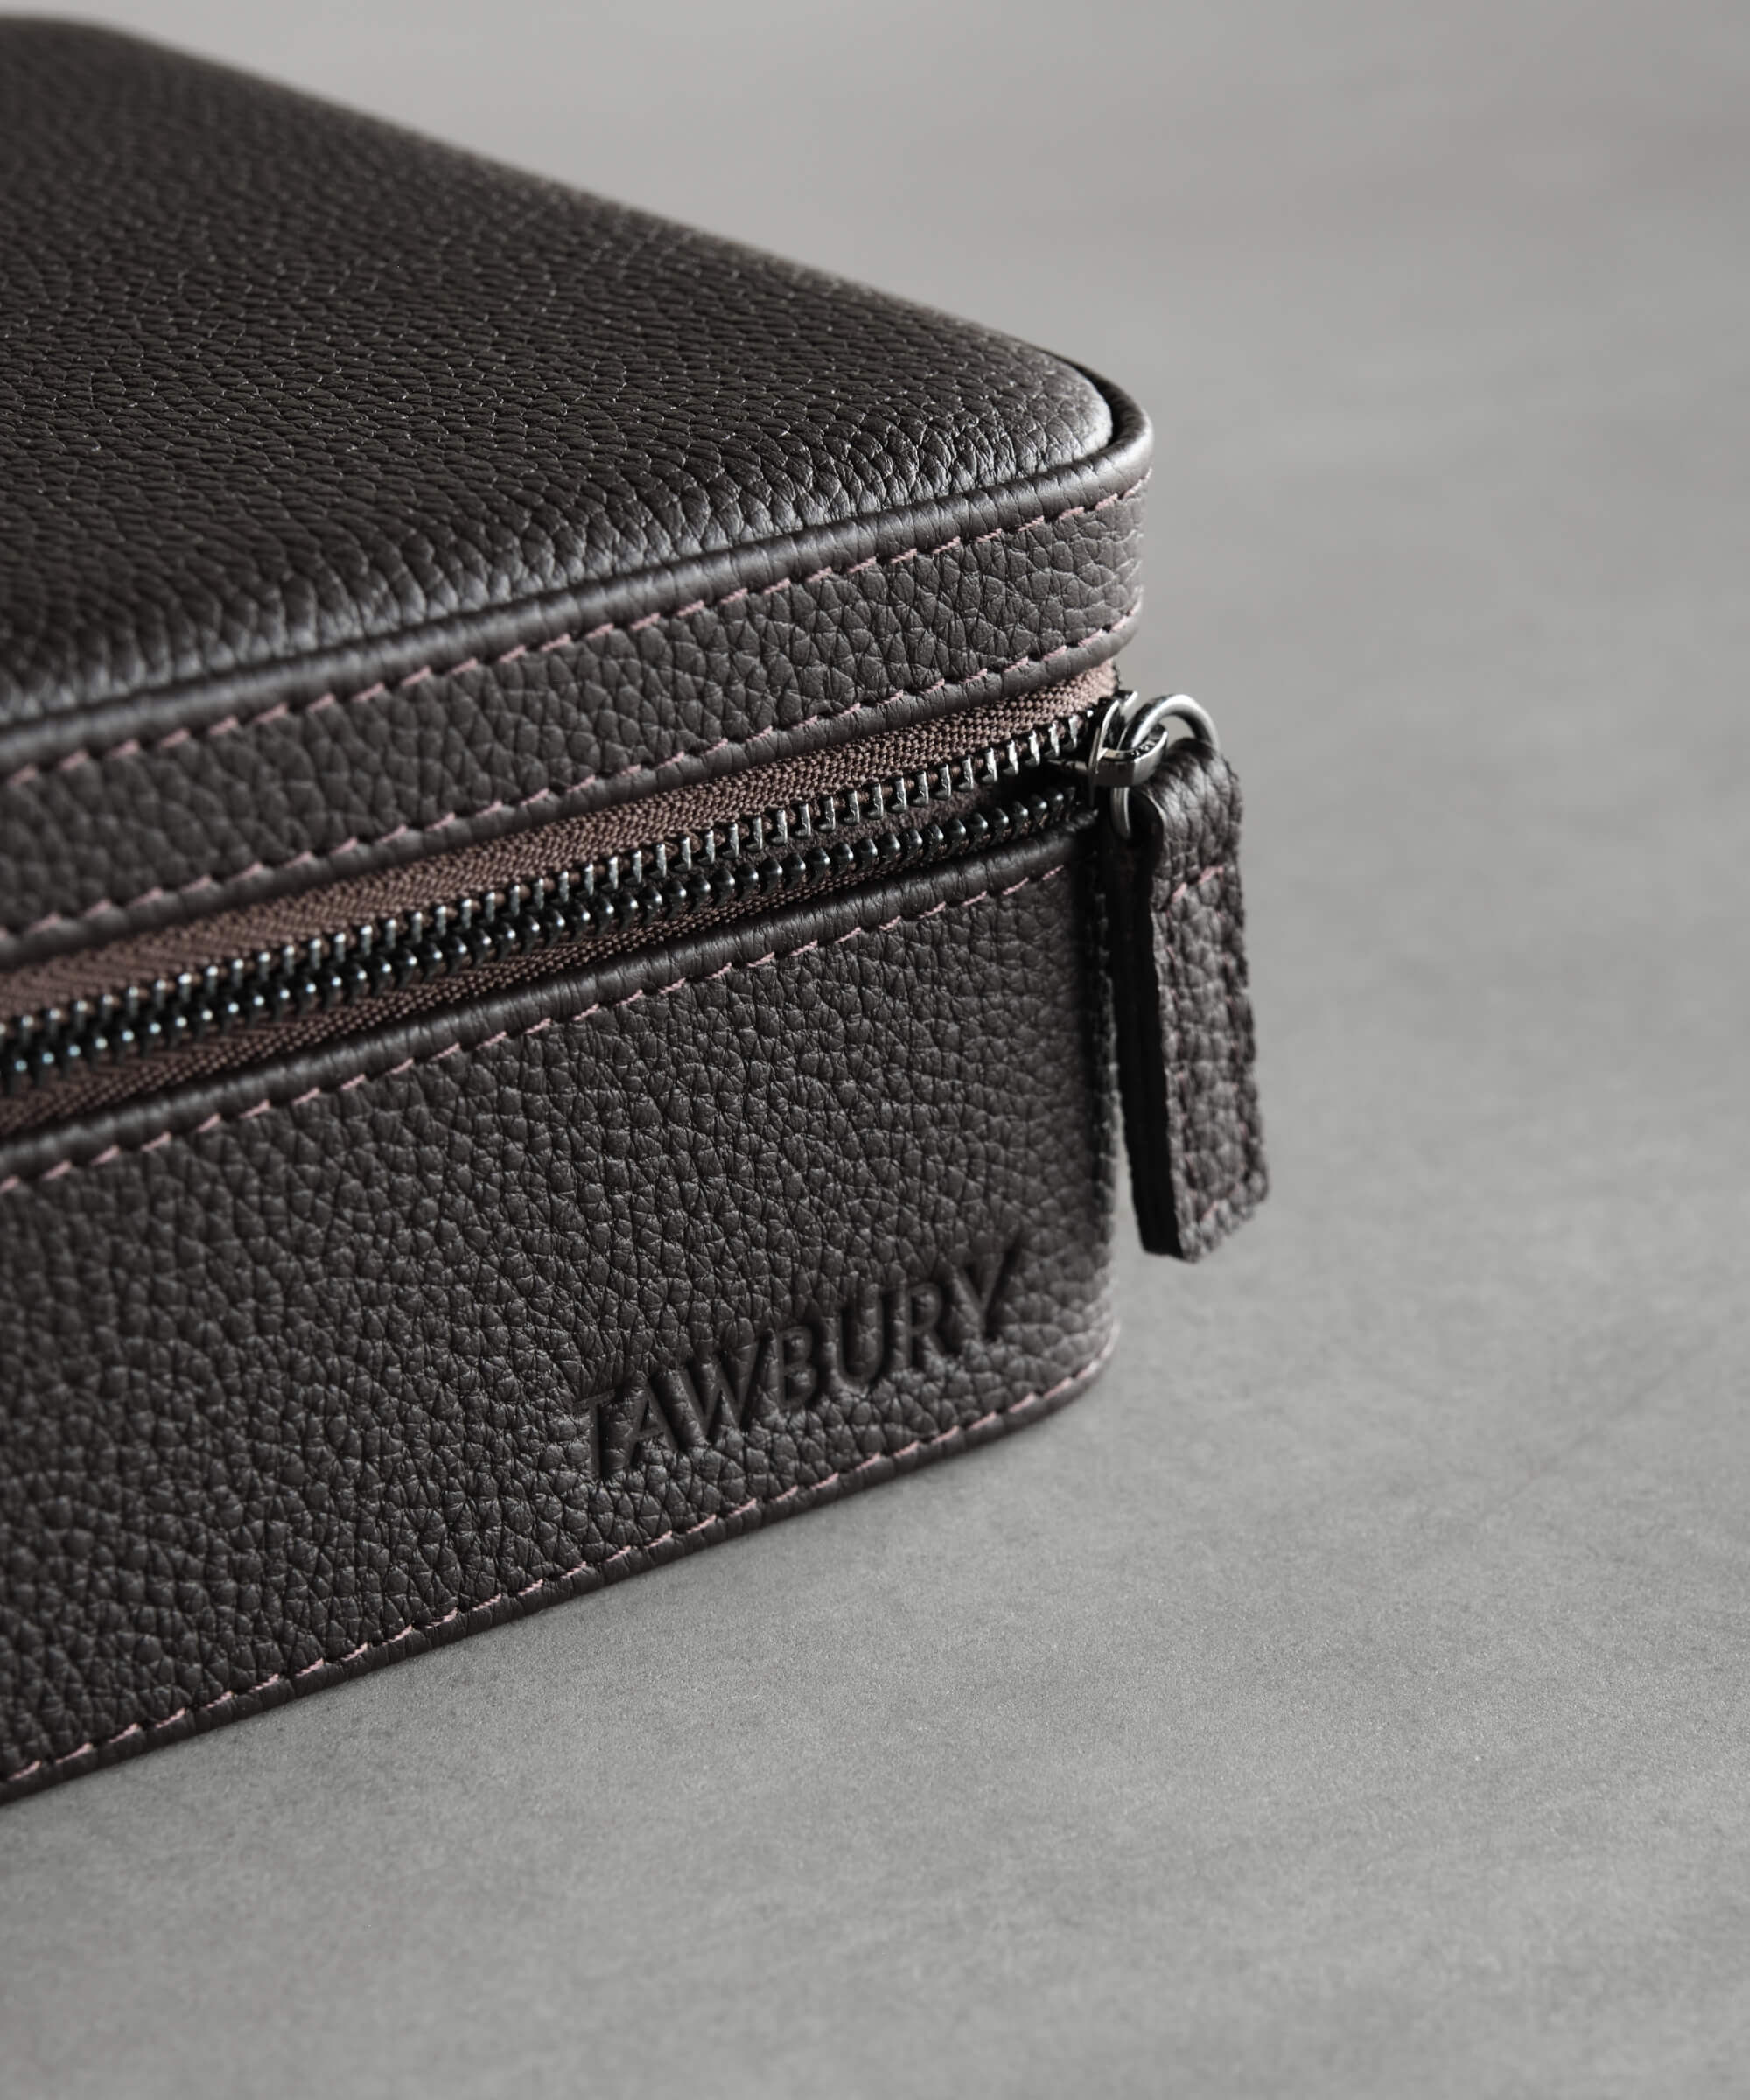 A close-up of a textured brown leather pouch with a zipper and the word "TAWBURY" embossed on it, reminiscent of the refined design seen in the Fraser 6 Watch Travel Case - Brown (Coming Soon).